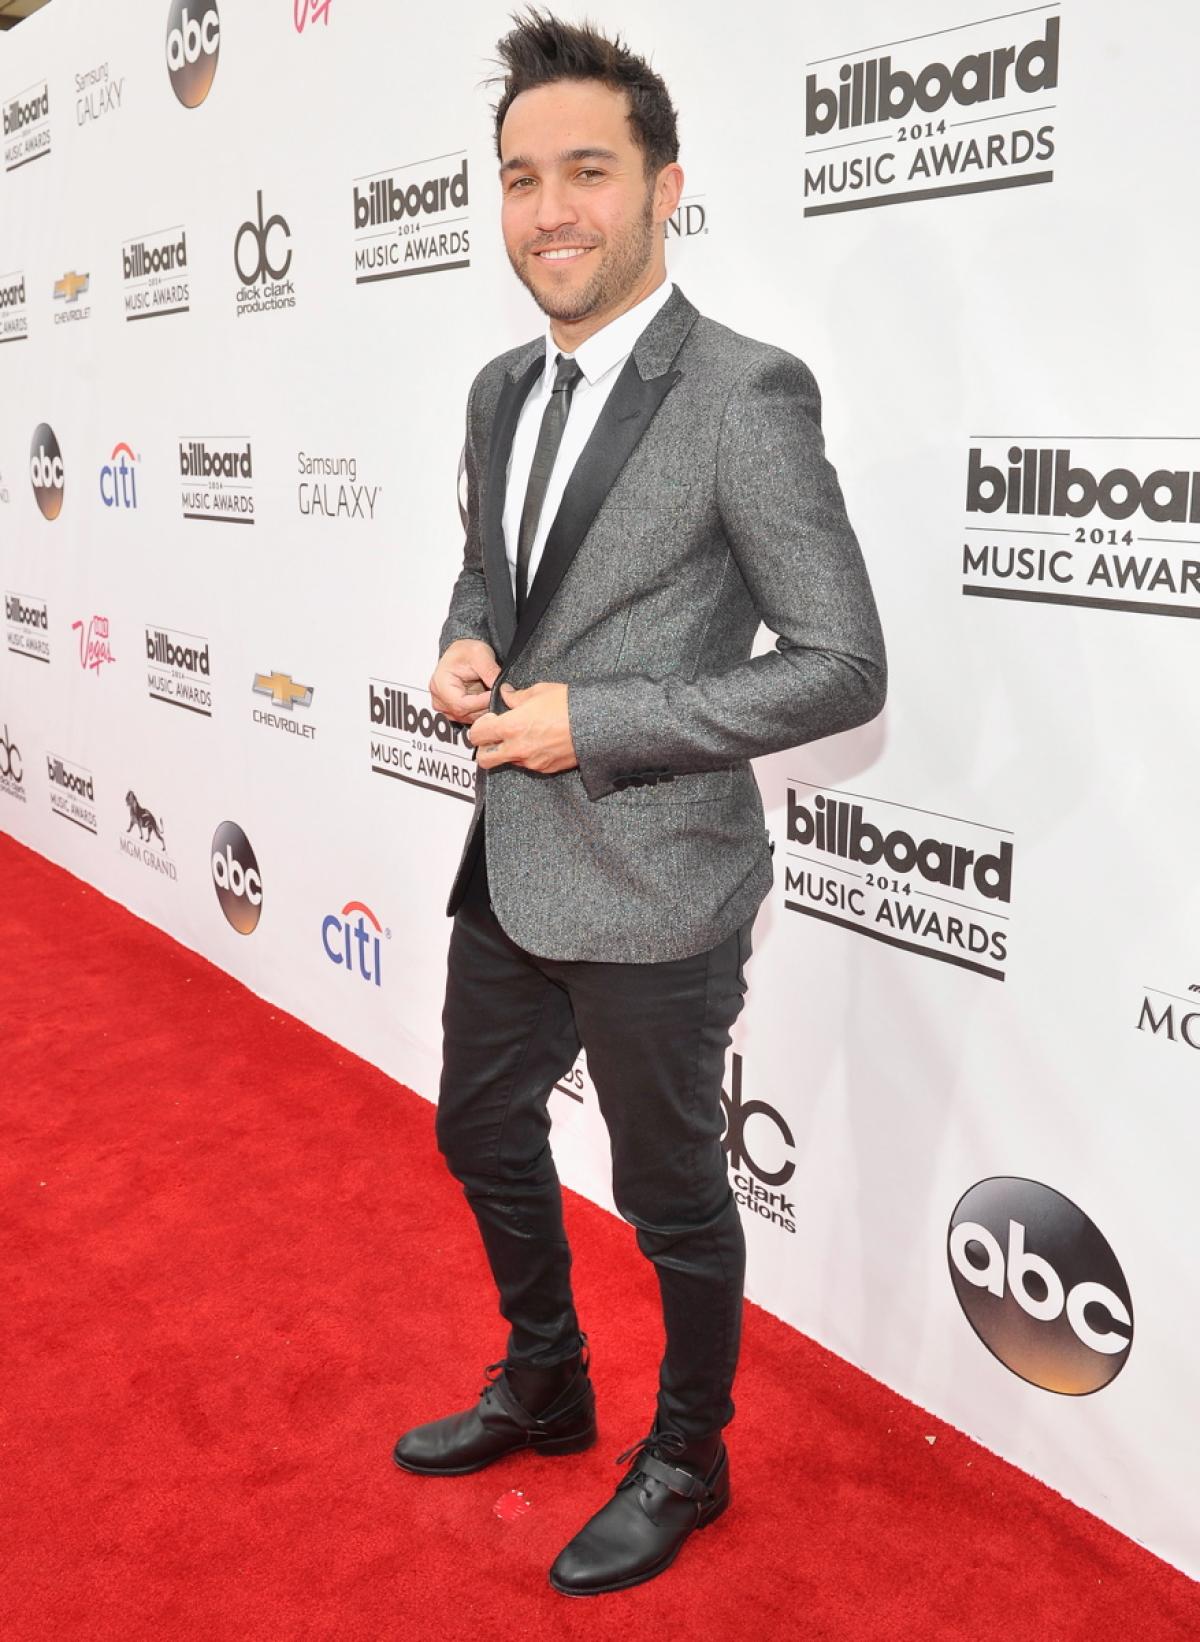 2014-billboard-music-awards-red-carpet-Pete Wentz of Fall Out Boy